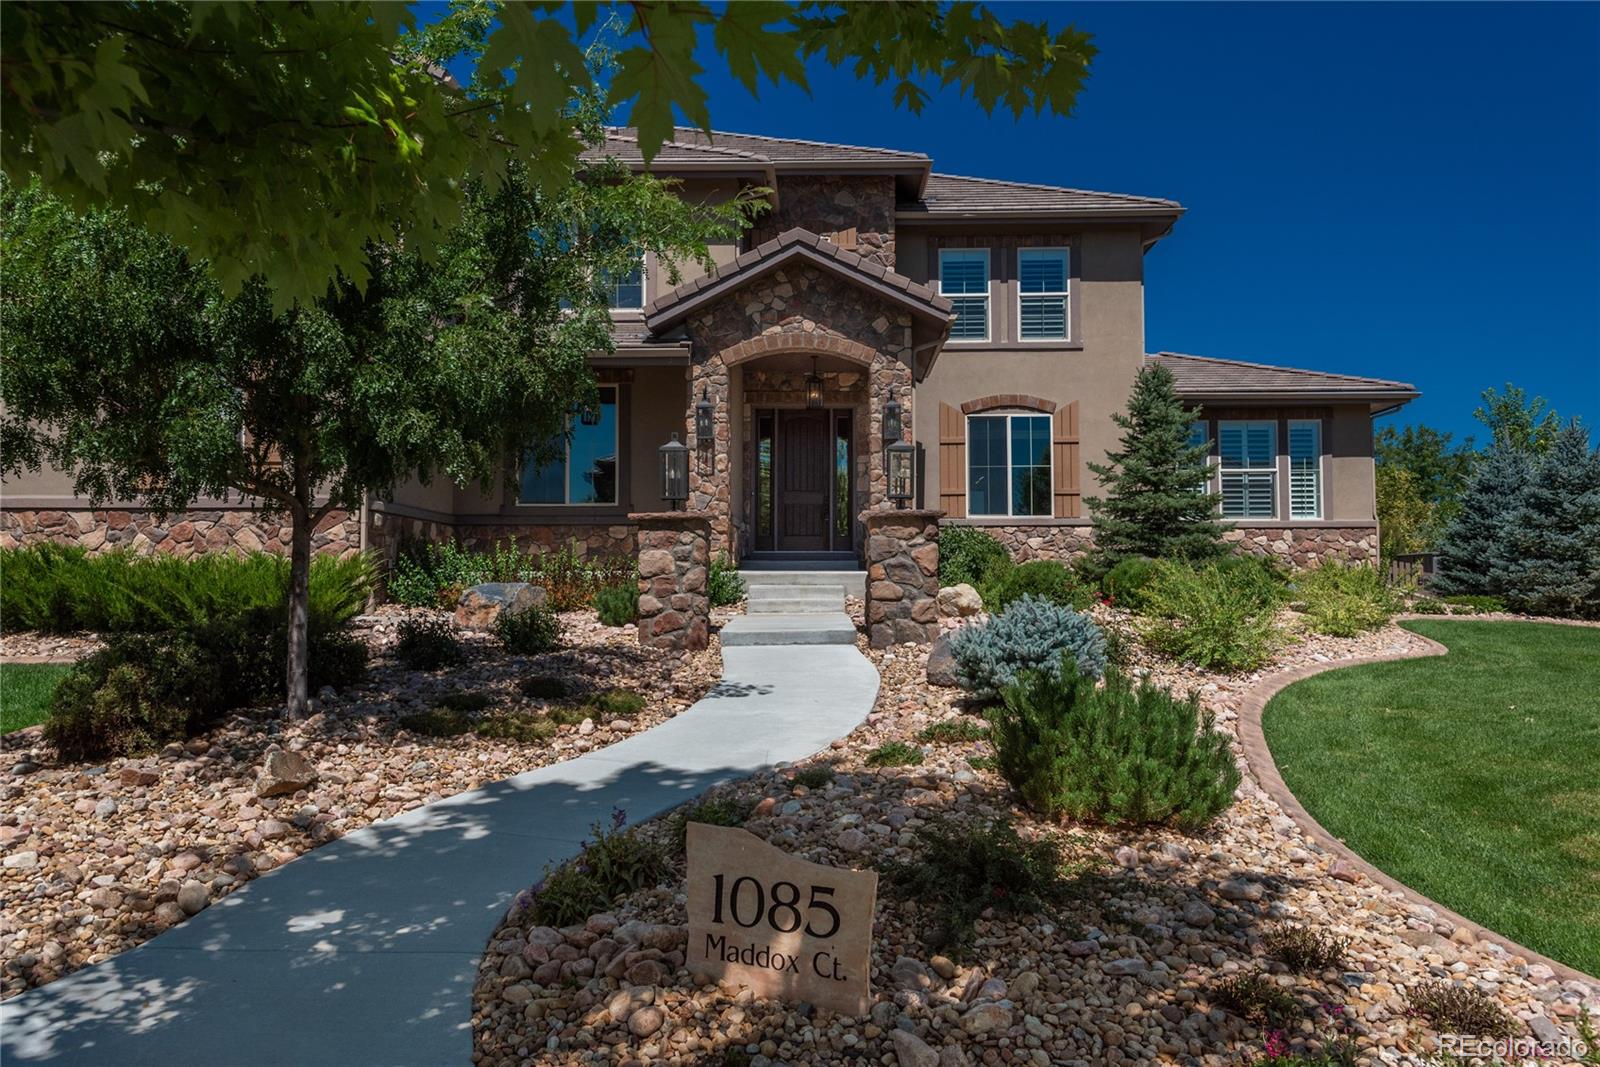 Report Image for 1085  Maddox Court,Broomfield, Colorado